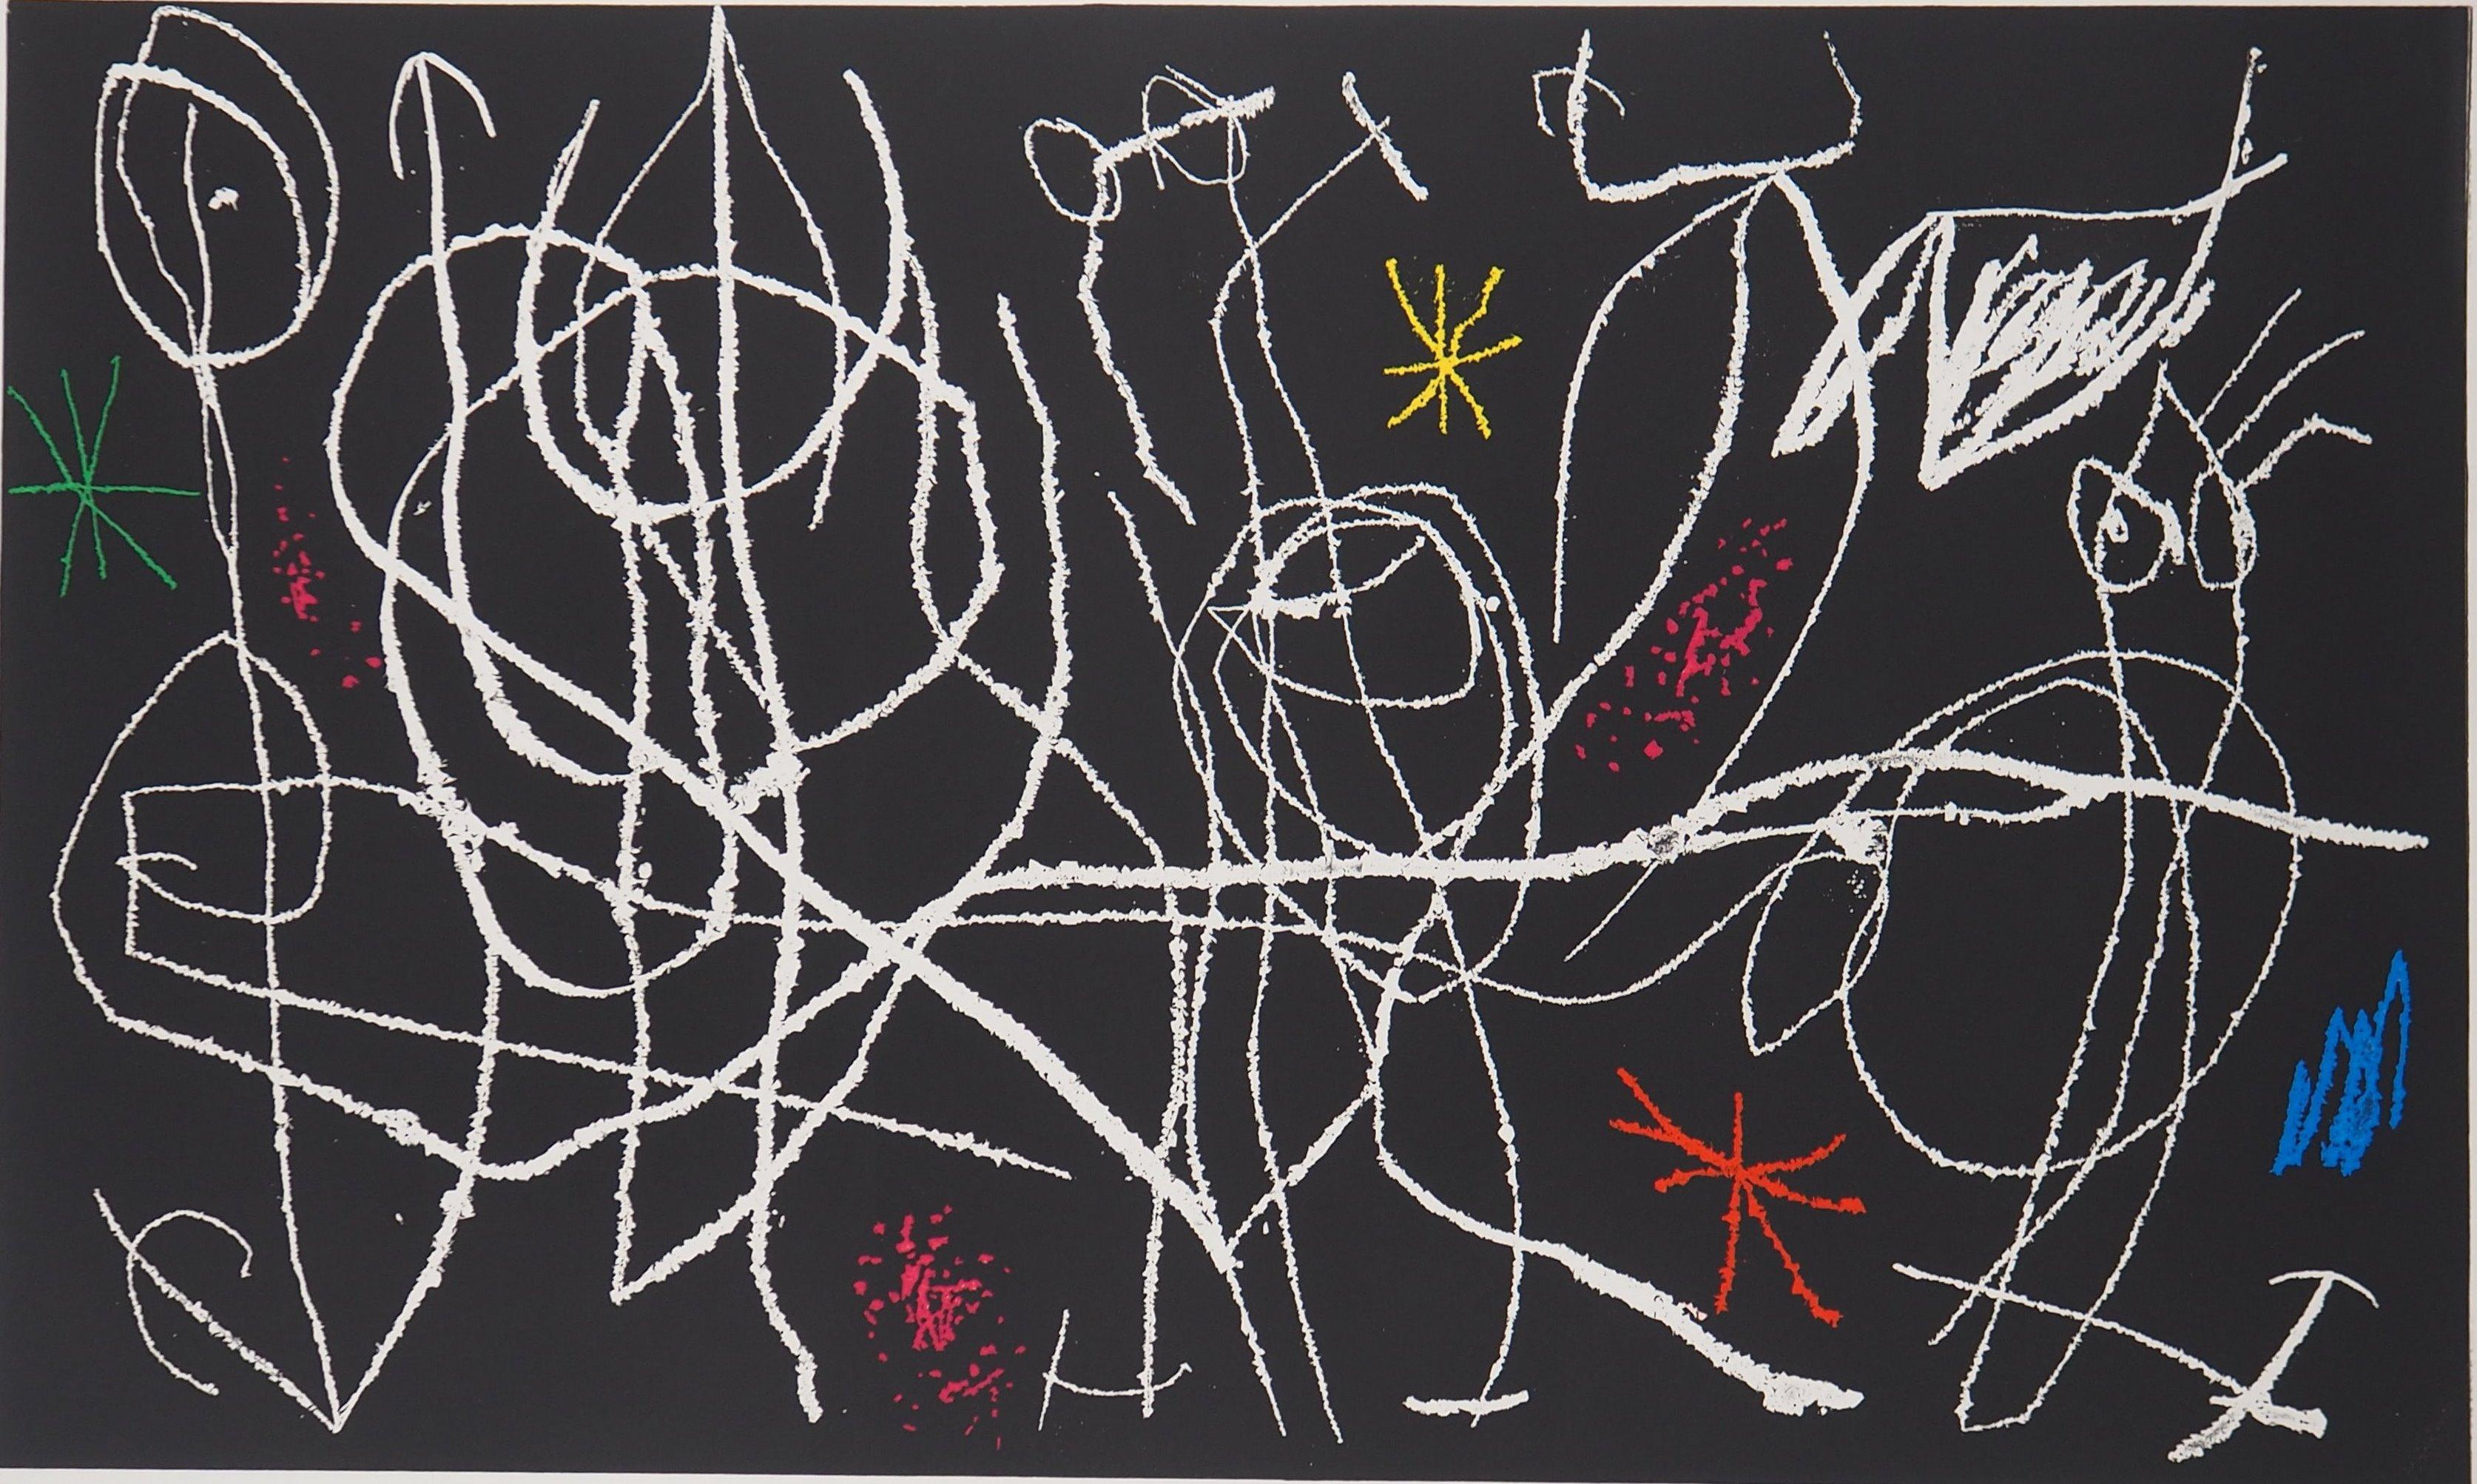 Sunday Guest II - Tall Original Etching, Handsigned (Dupin #481) - Black Abstract Print by Joan Miró